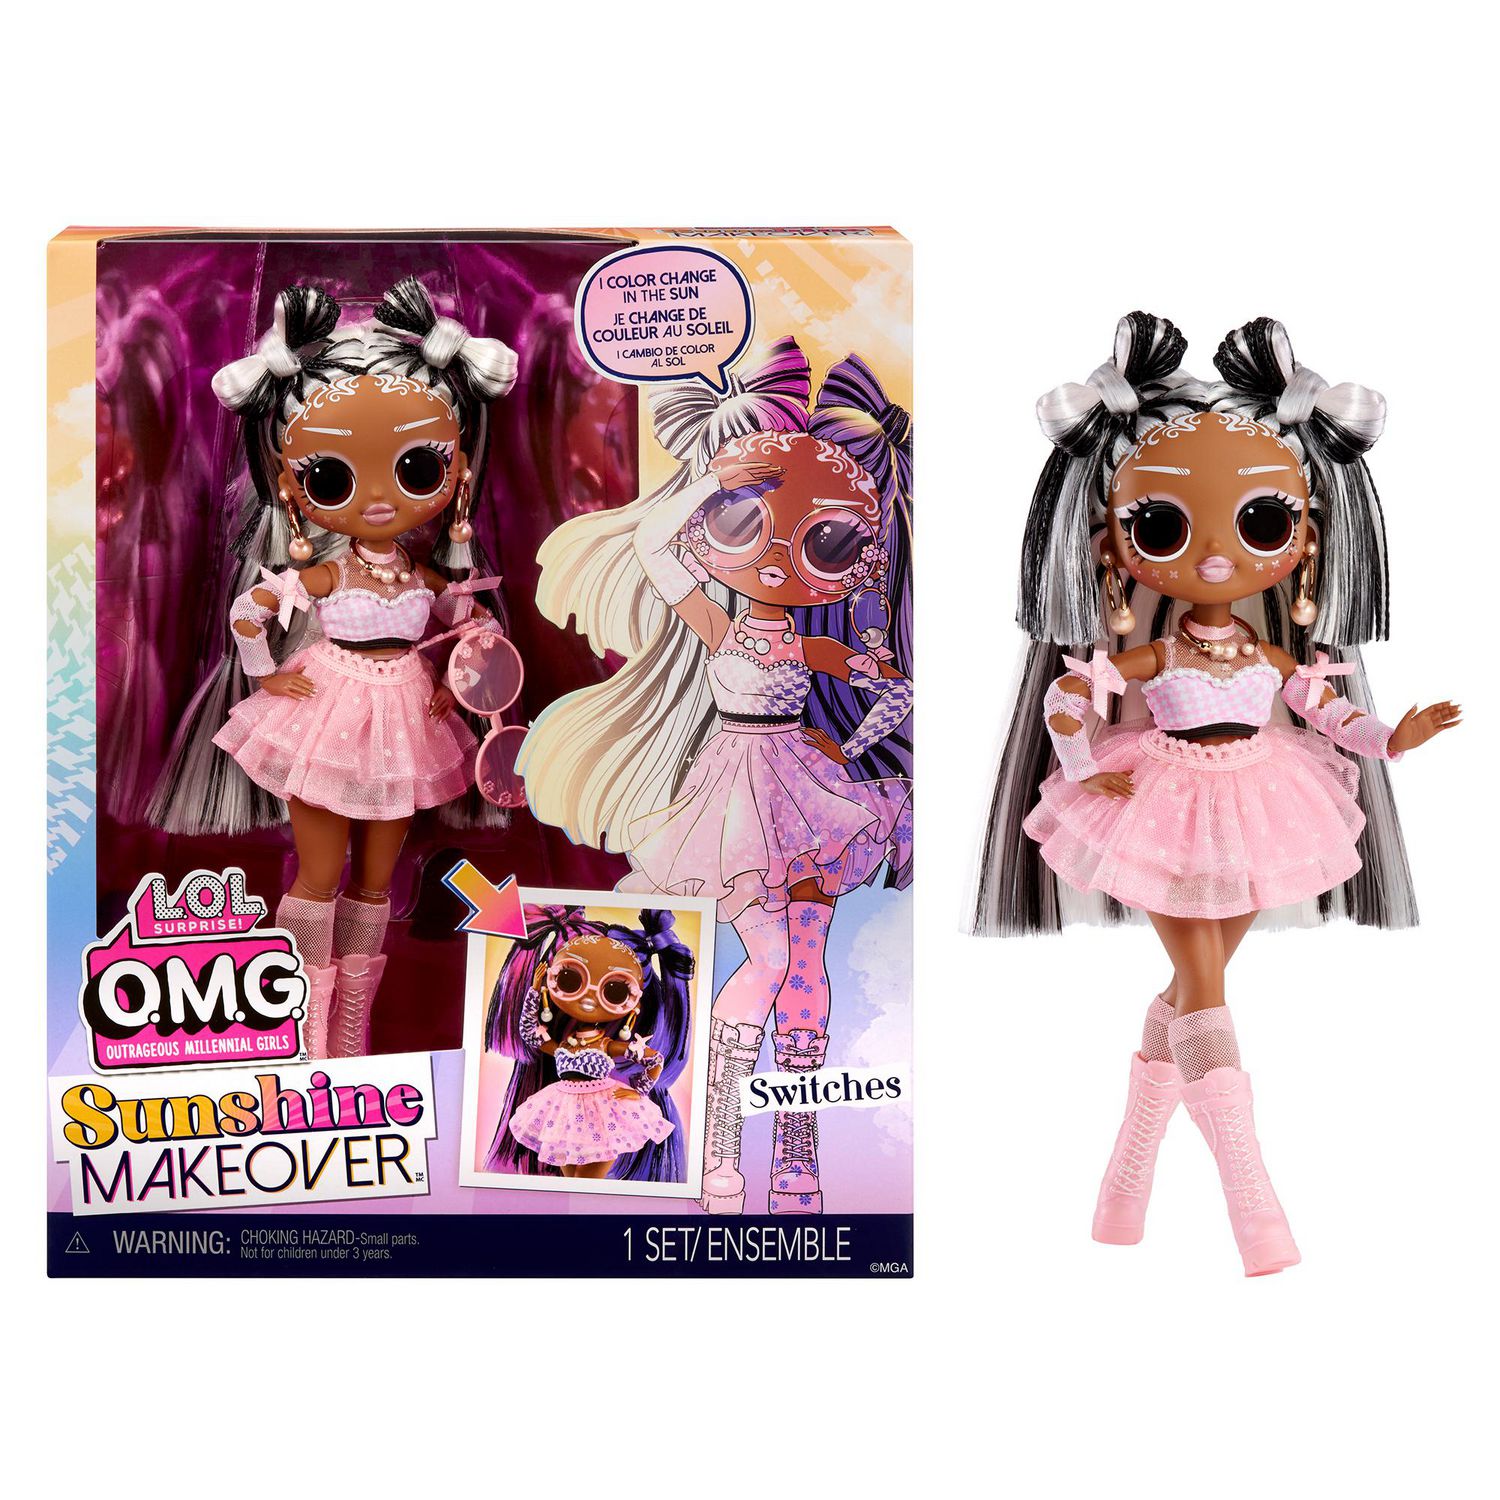 LOL Surprise OMG Sunshine Makeover™ Switches Fashion Doll with